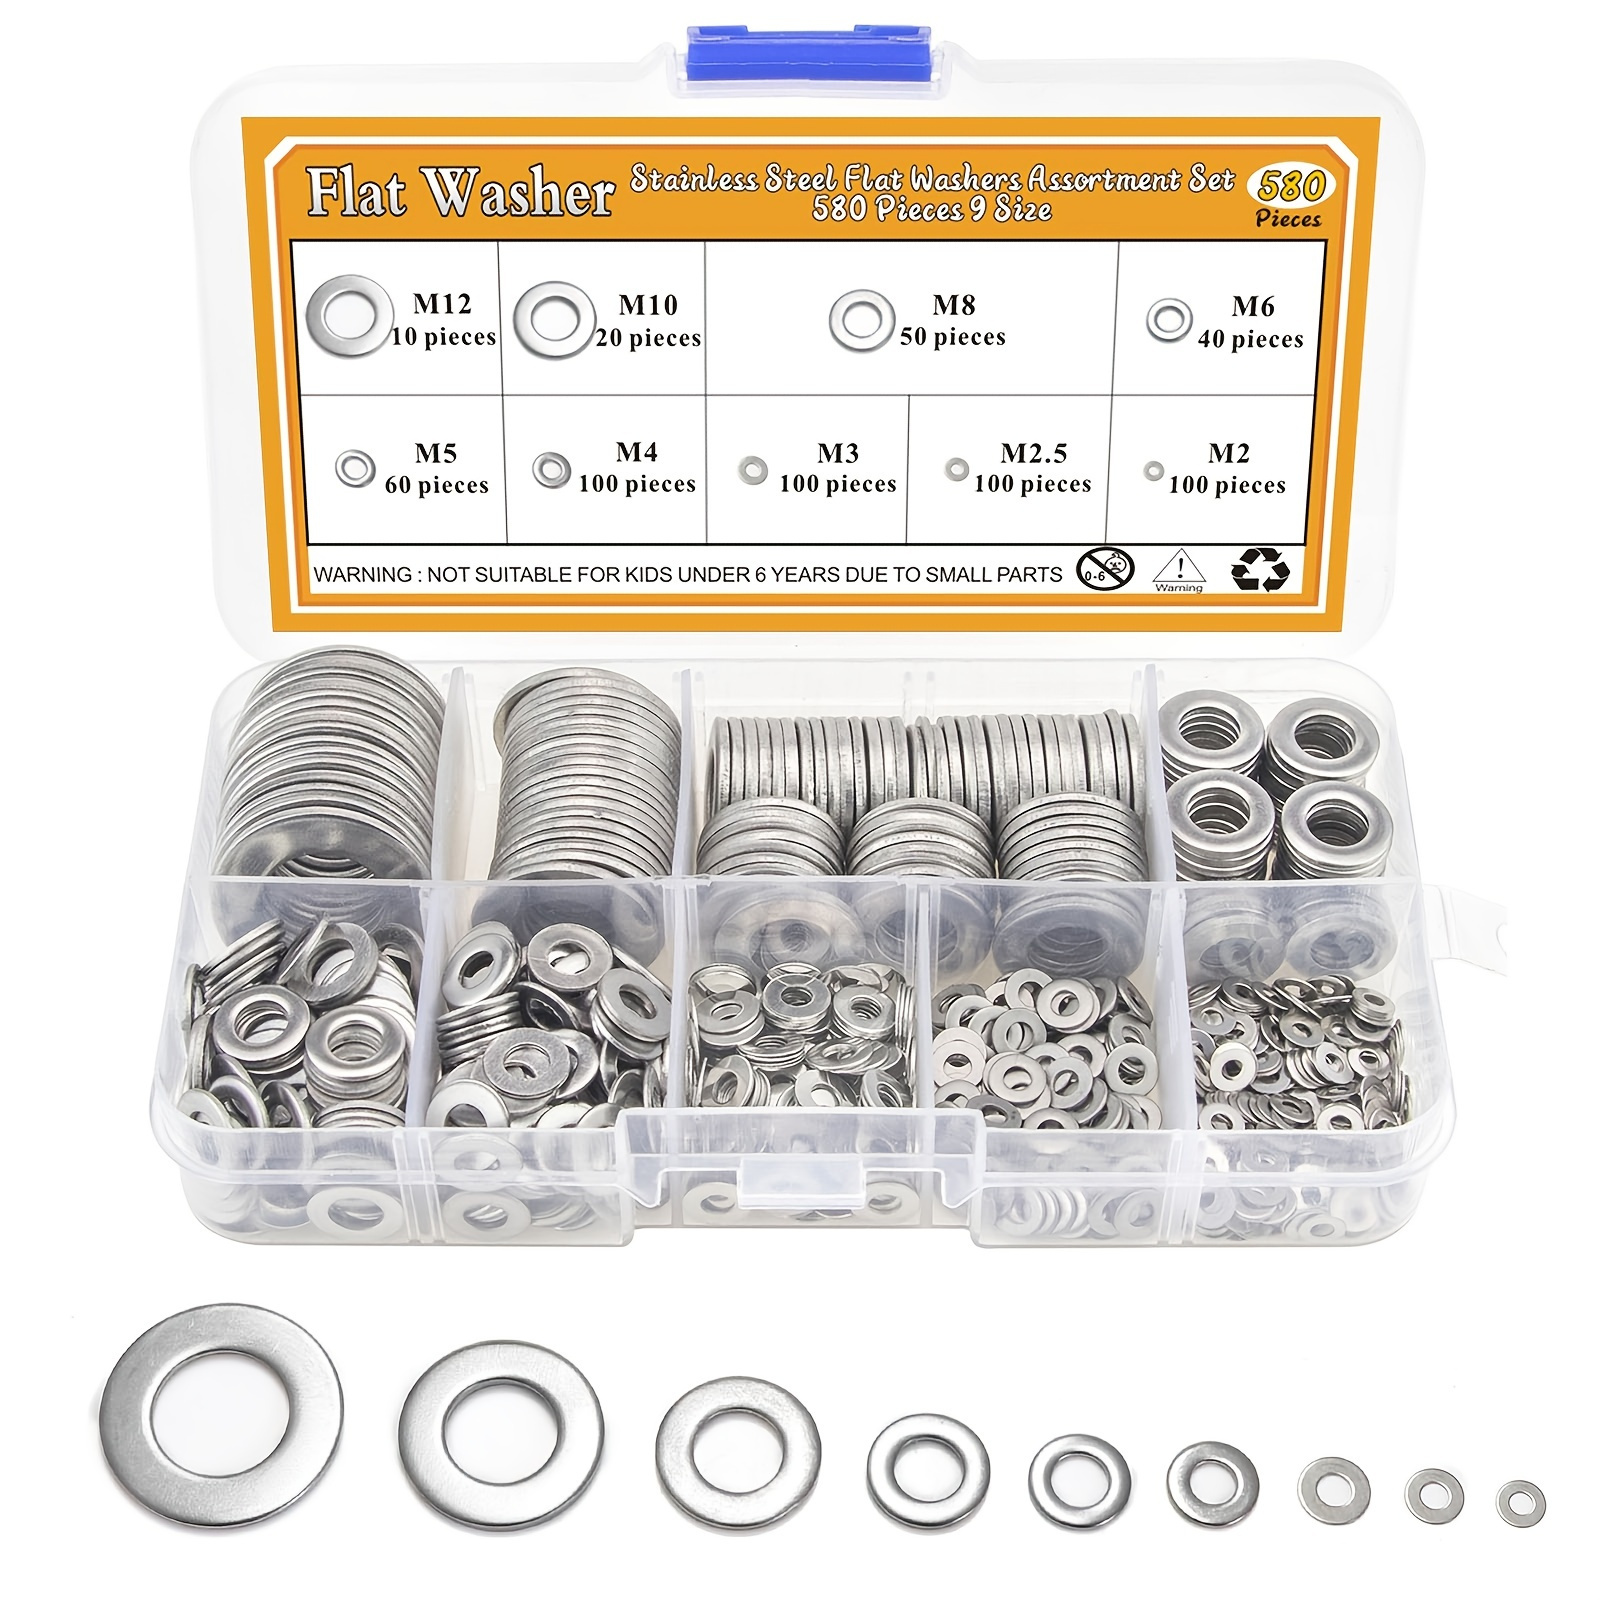 

360pcs/580pcs 304 Stainless Steel Flat Washers Set - Perfect For Home Decor, Factory Repair, Kitchens, Shops & More!